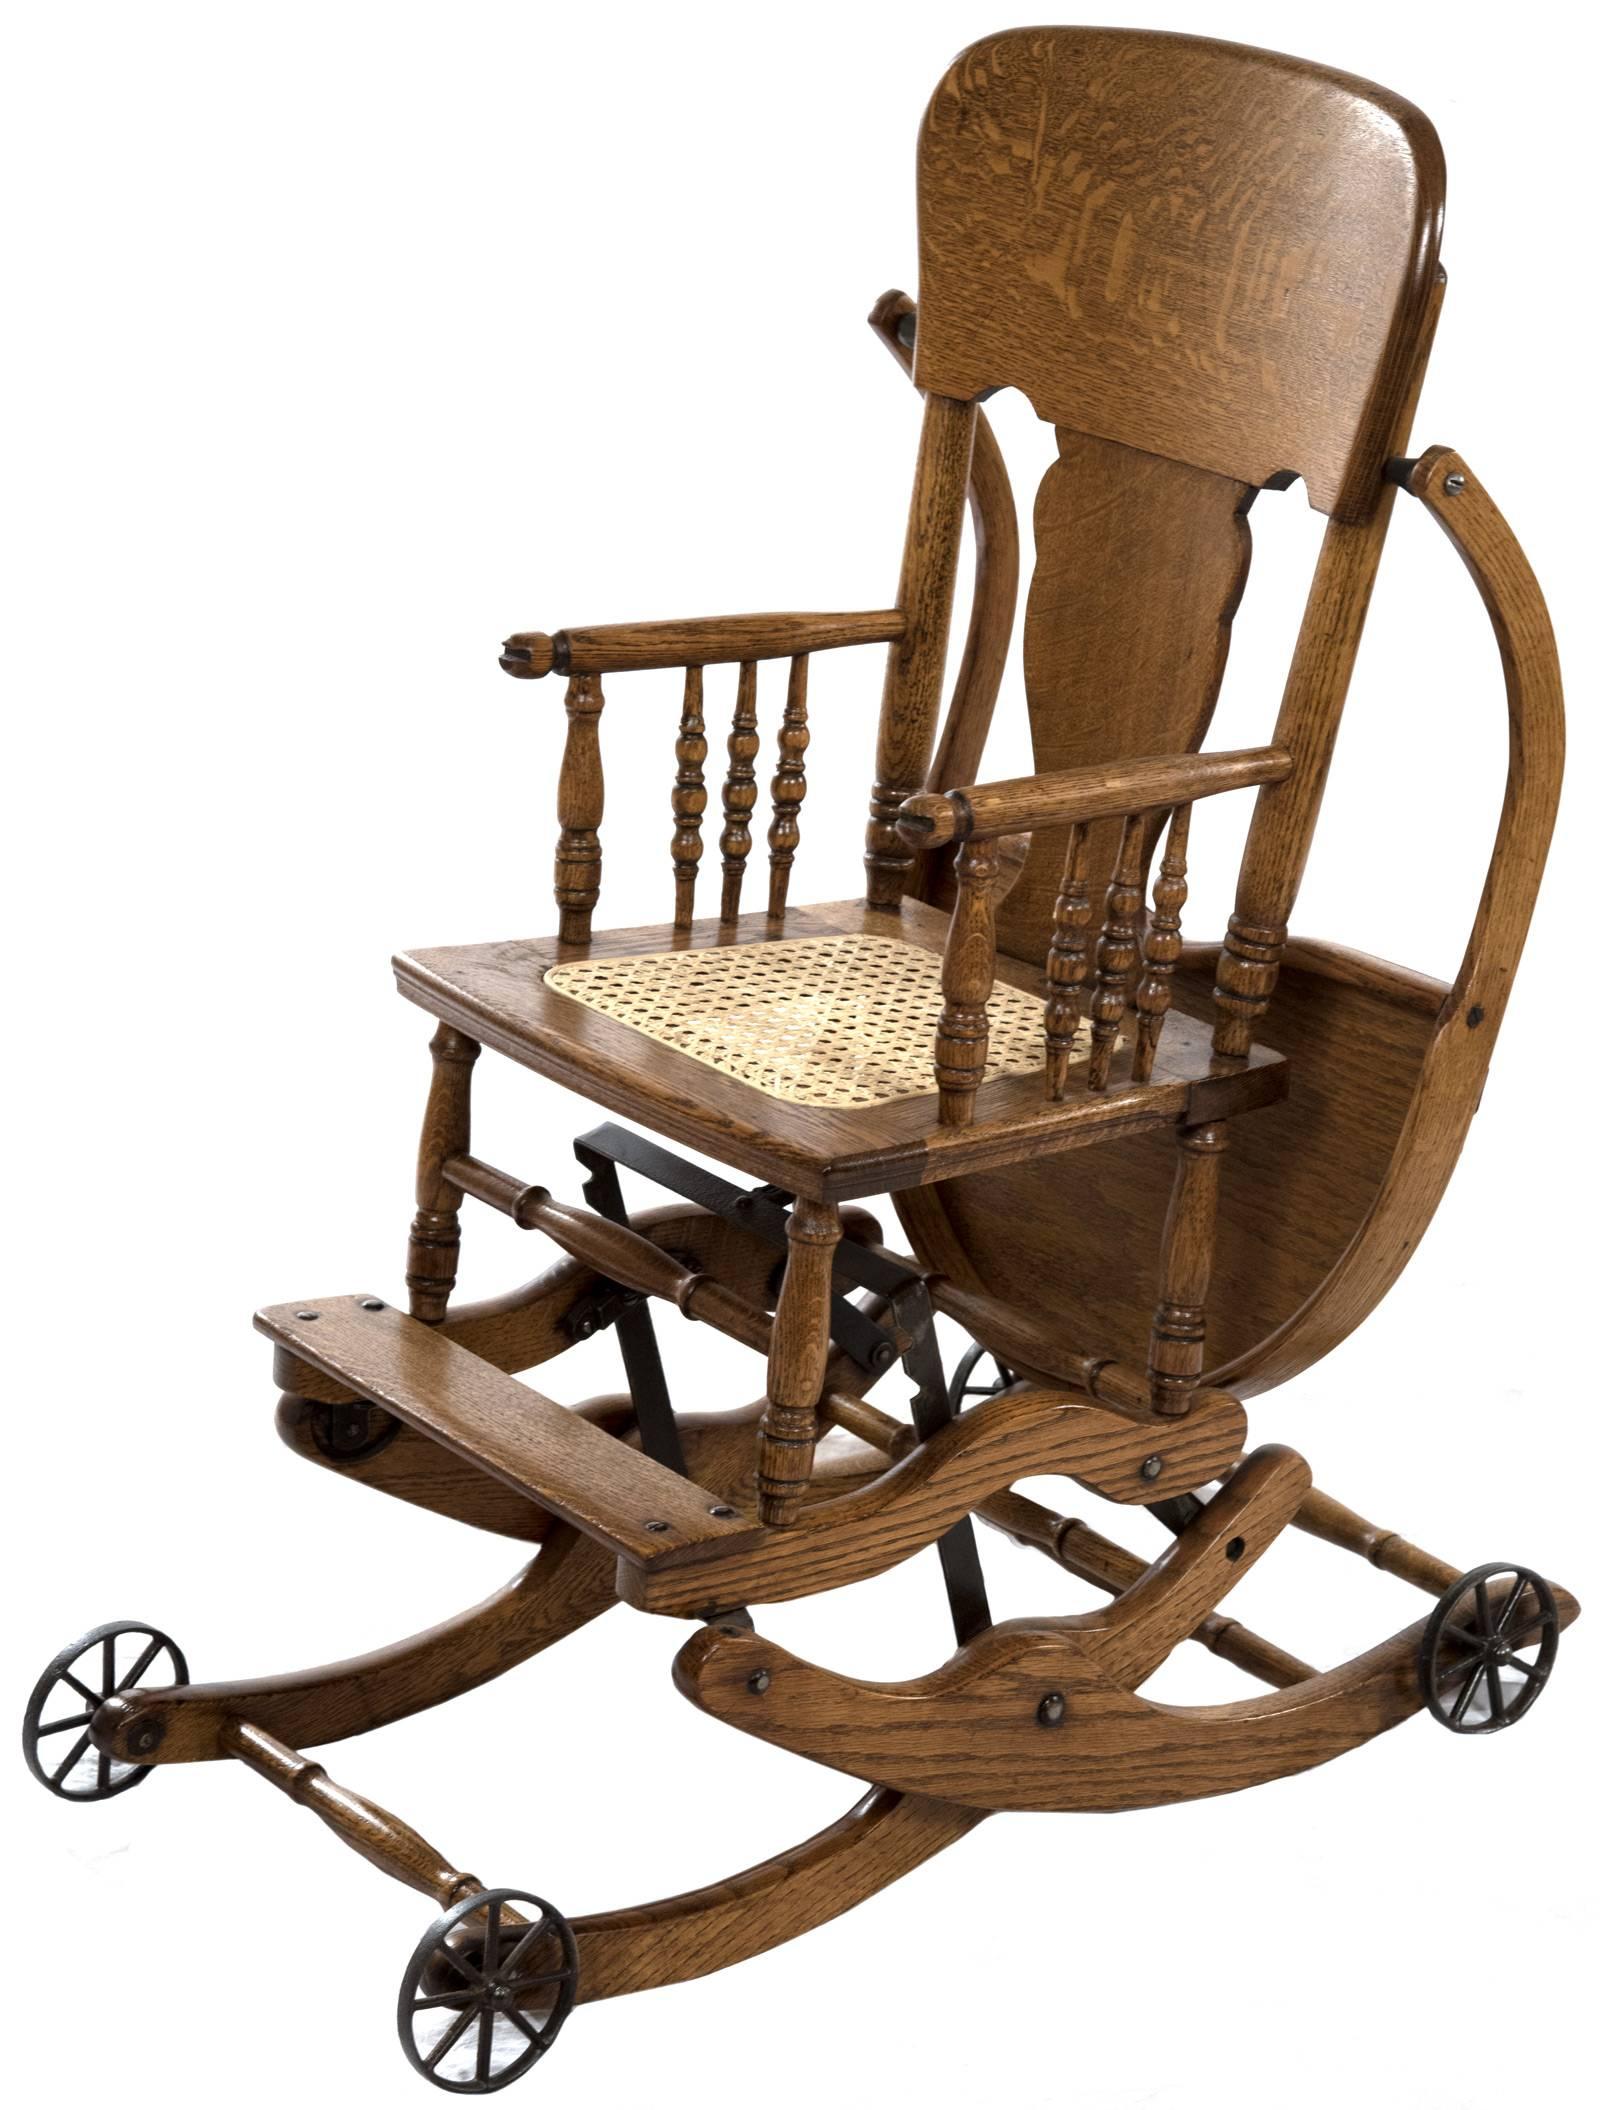 This solid golden oak baby highchair is composed of turned spindles and supports, a cane seat, a deep tray that lifts to move behind the seat, and sits on four metal wheels. The mechanics of the construction allow the highchair to convert to a